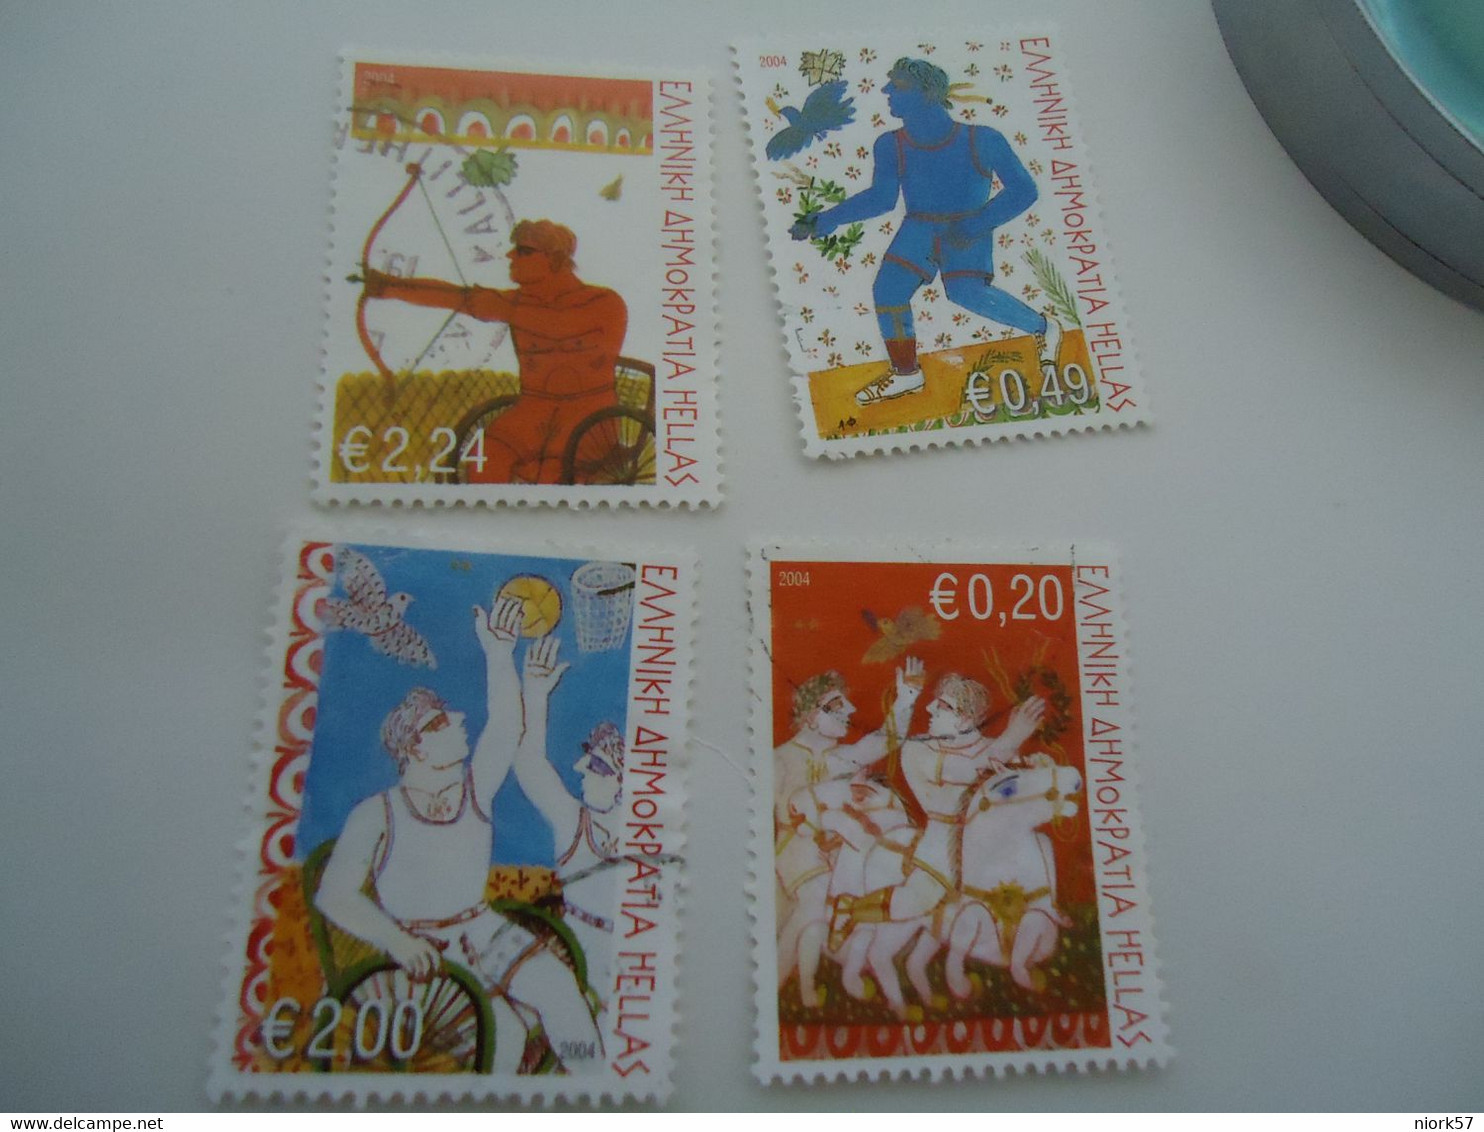 GREECE USED STAMPS SET 4 OLYMPIG GAMES ATHENS 2004 POWER OF WILL - Verano 2004: Atenas - Paralympic